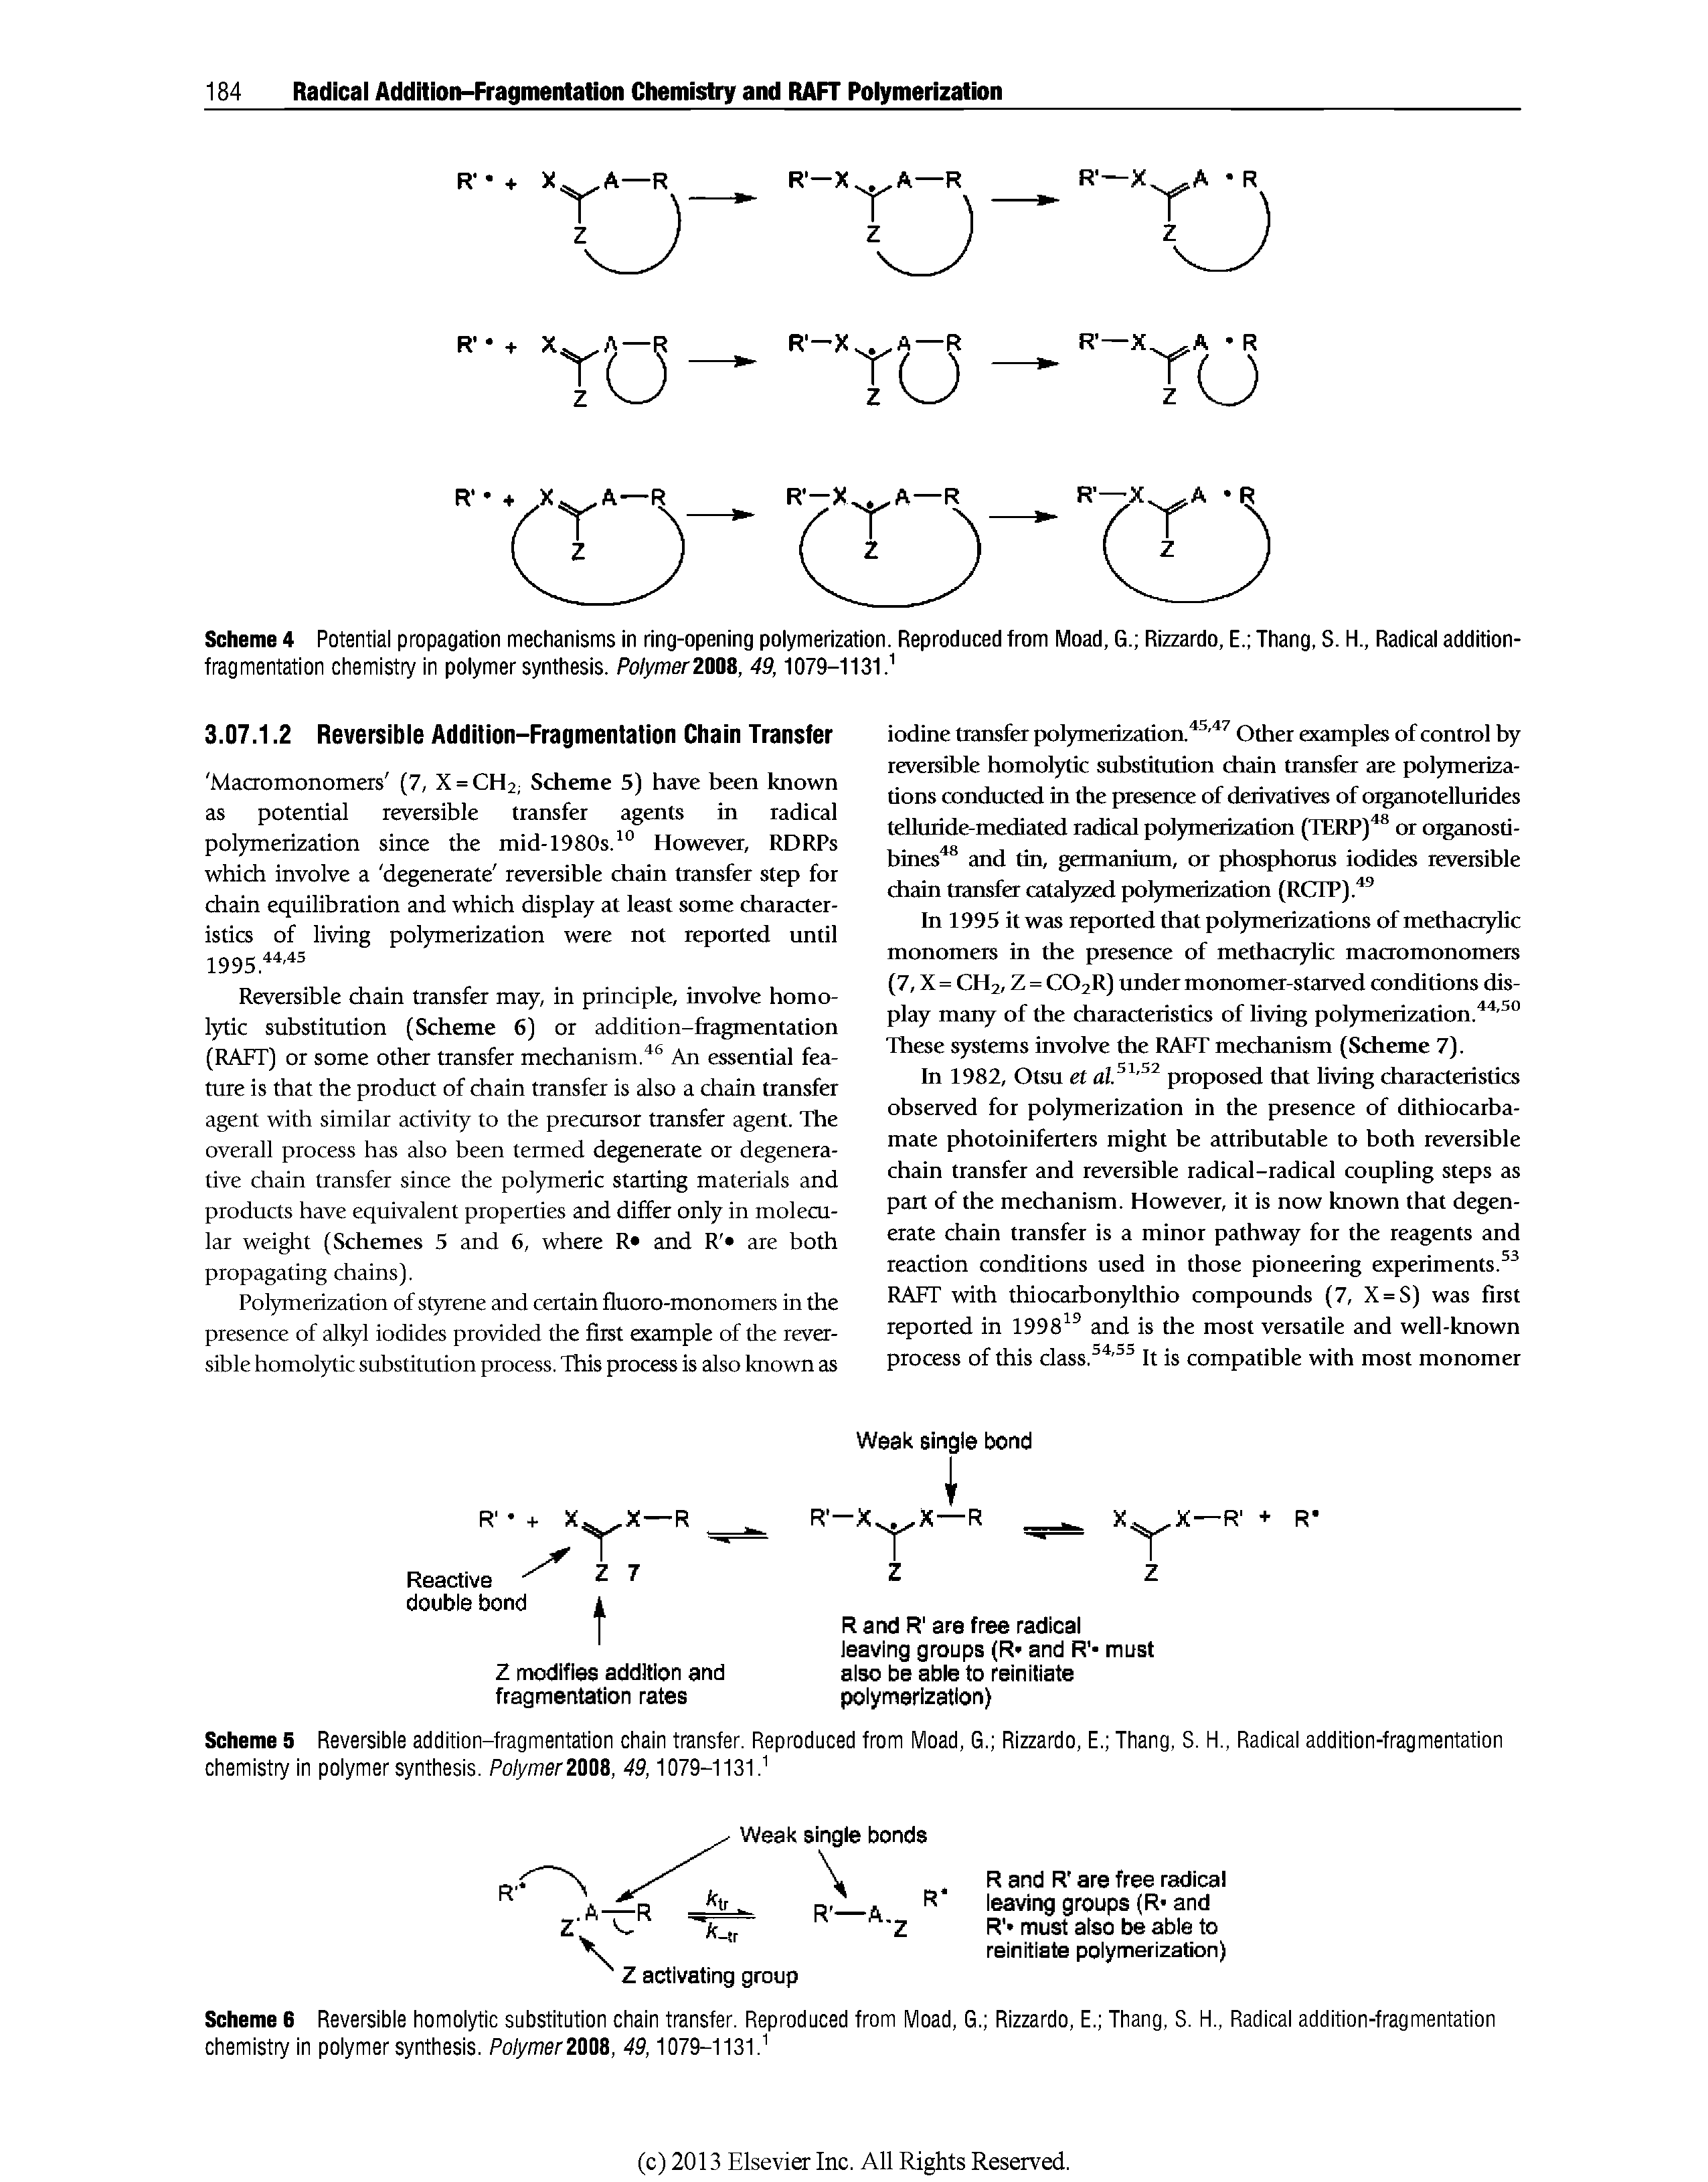 Scheme 6 Reversible homolytic substitution chain transfer. Reproduced from Moad, G. Rizzardo, E. Thang, S. H., Radical addition-fragmentation chemistry in polymer synthesis. Polymerl888, 49,1079-1131. ...